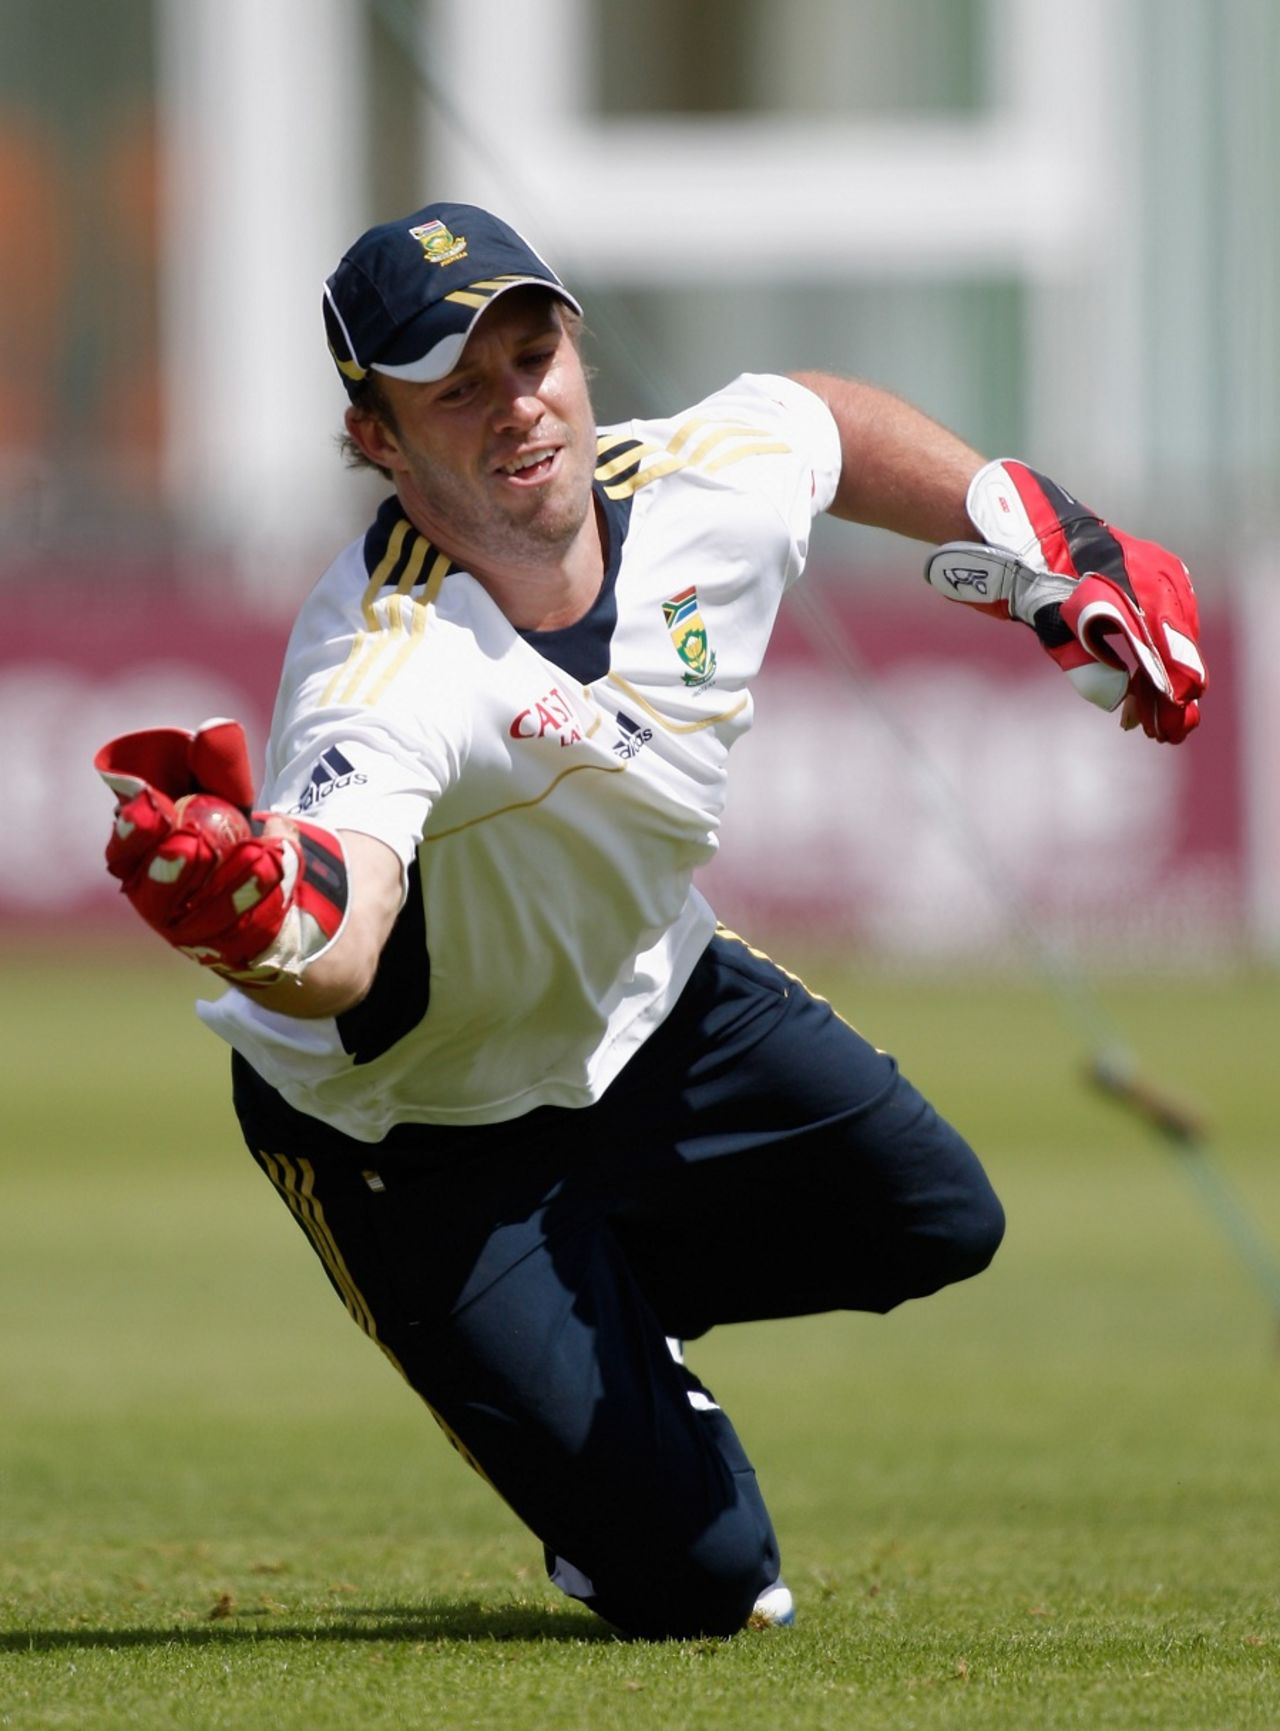 AB de Villiers takes a catch during wicketkeeping practice, Canterbury, July 12, 2012